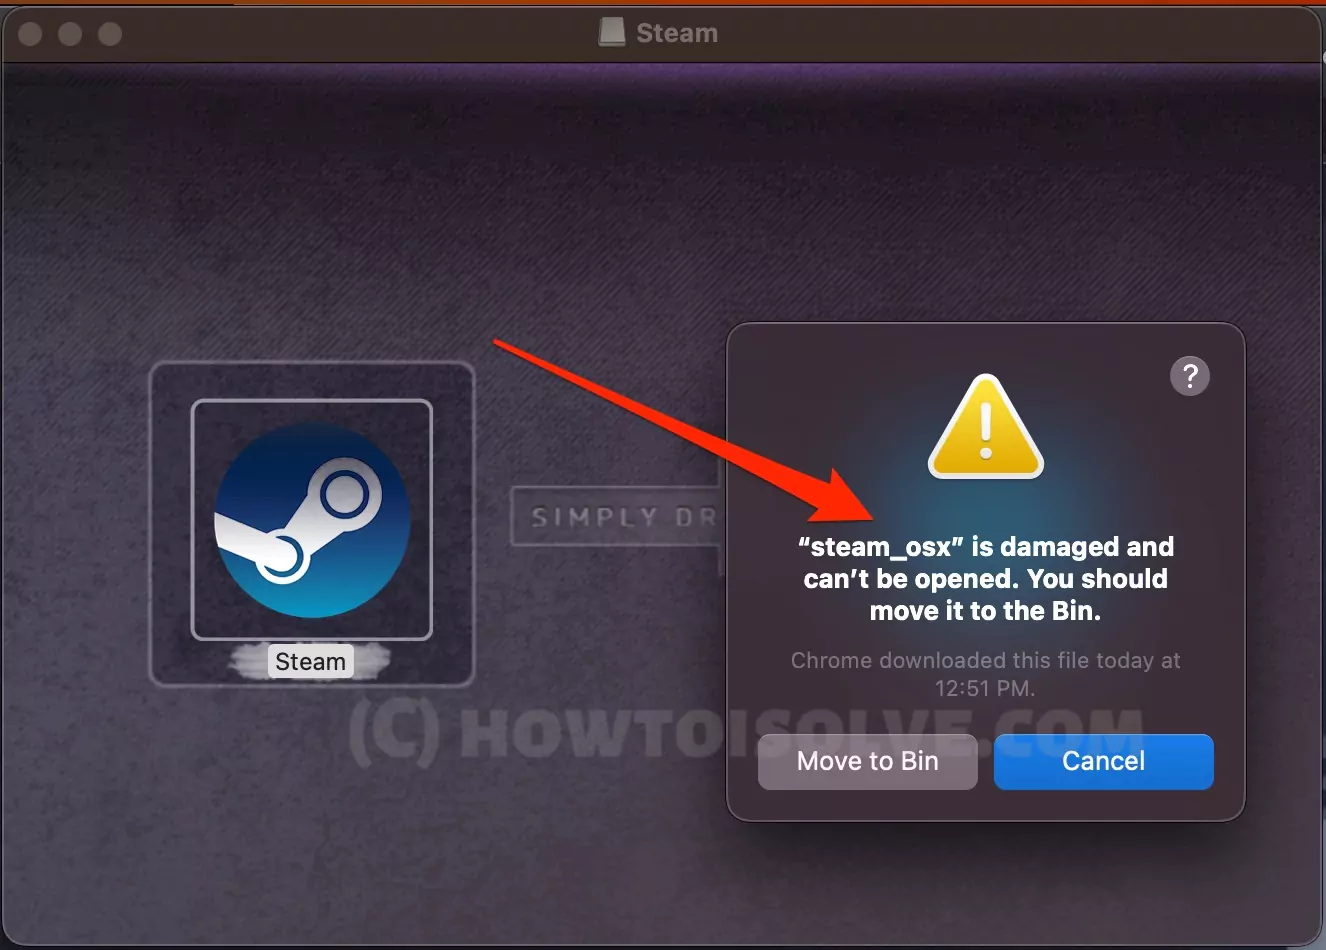 steam-osx-is-damaged-and-cant-be-opened-you-should-move-it-to-the-bin